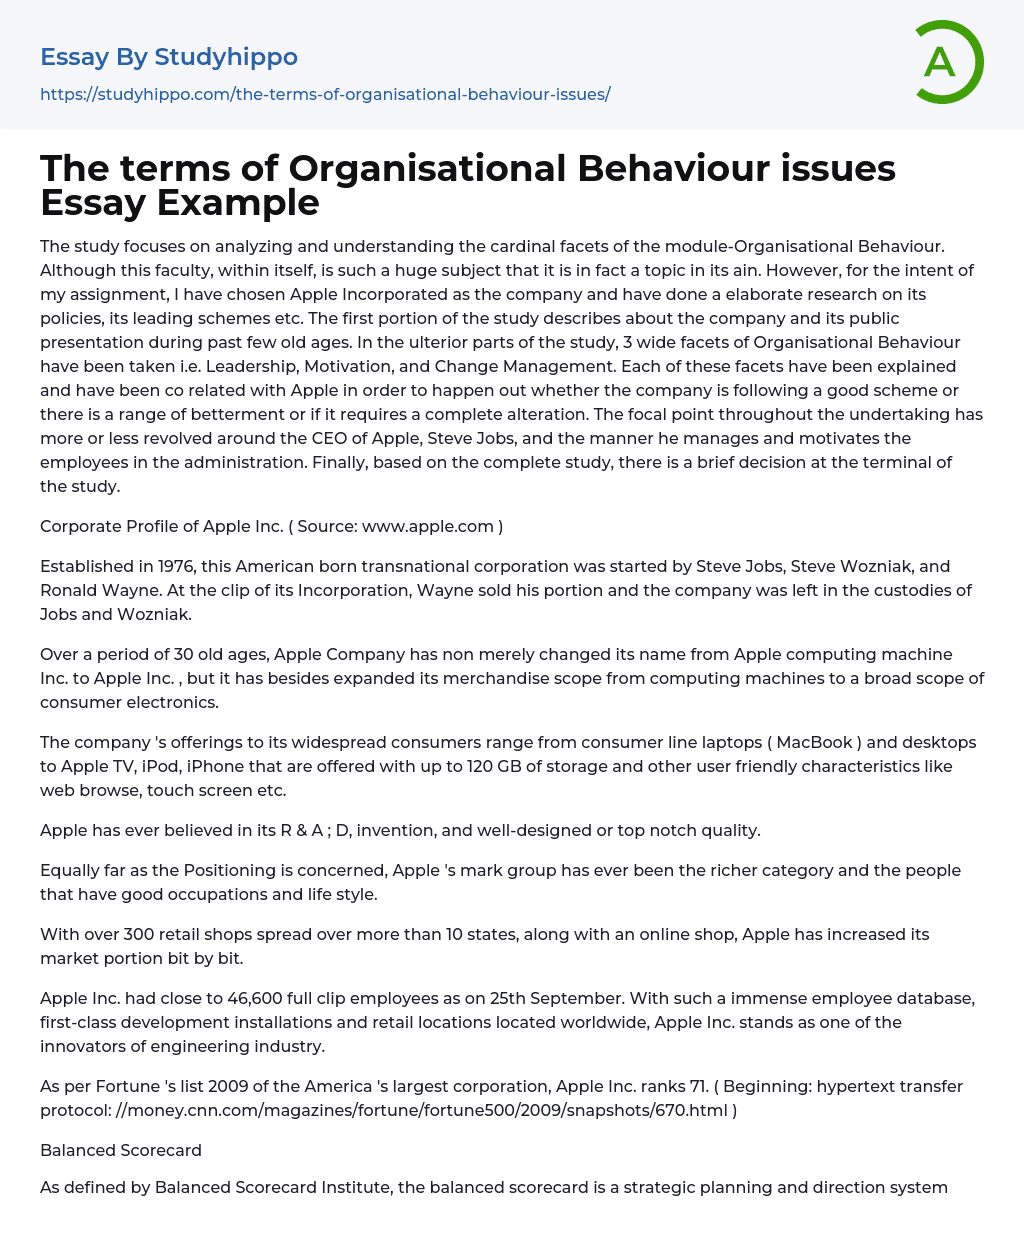 The terms of Organisational Behaviour issues Essay Example